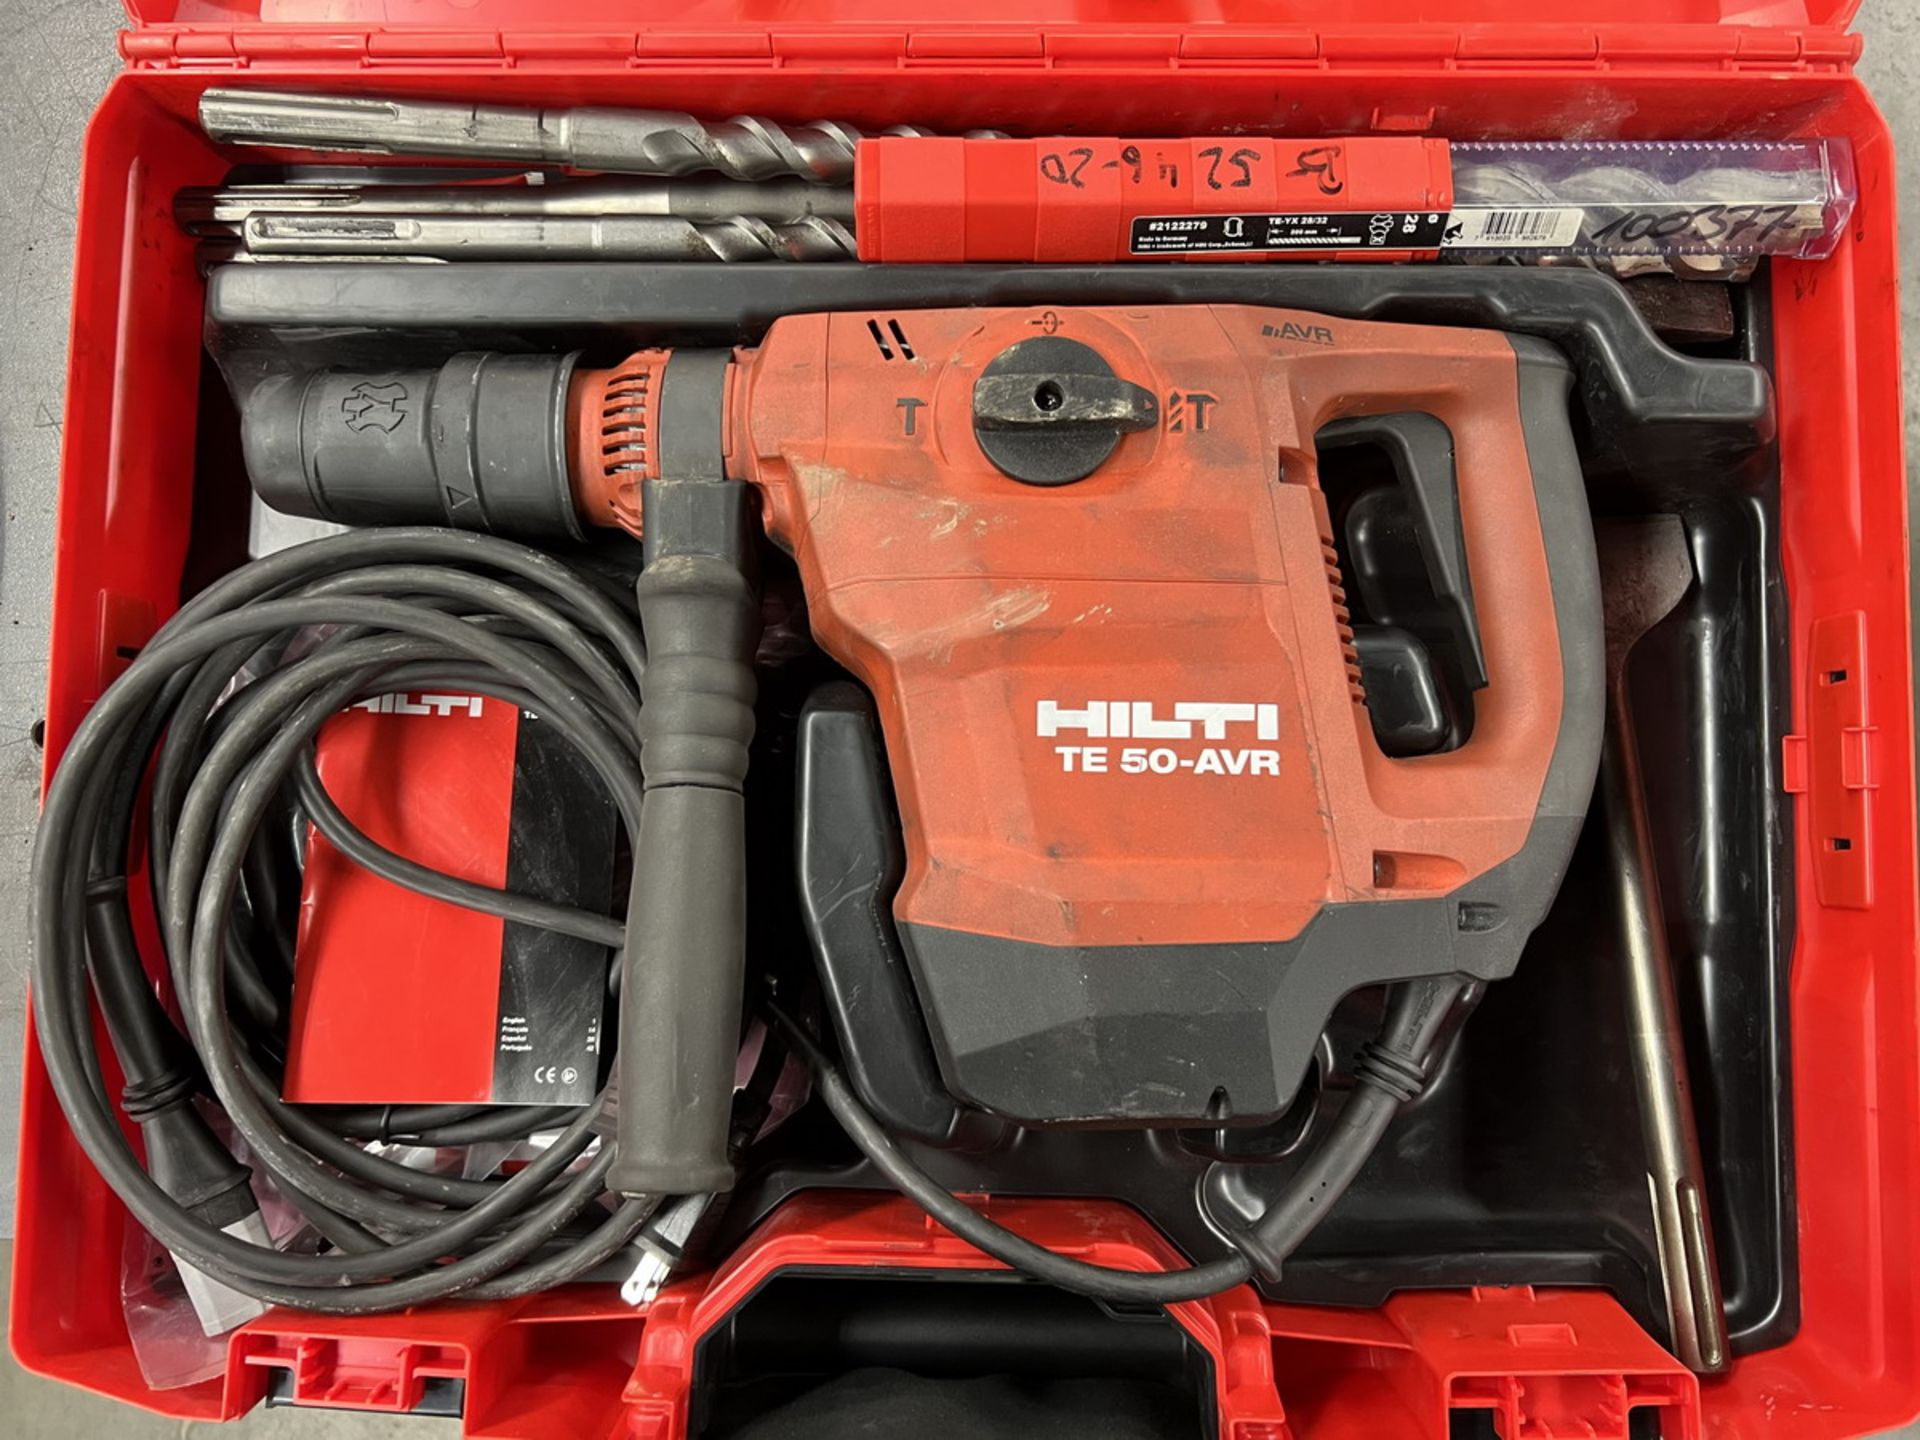 Hilti TE 50-AVR Electric Rotary Hammer Drill - Image 3 of 5